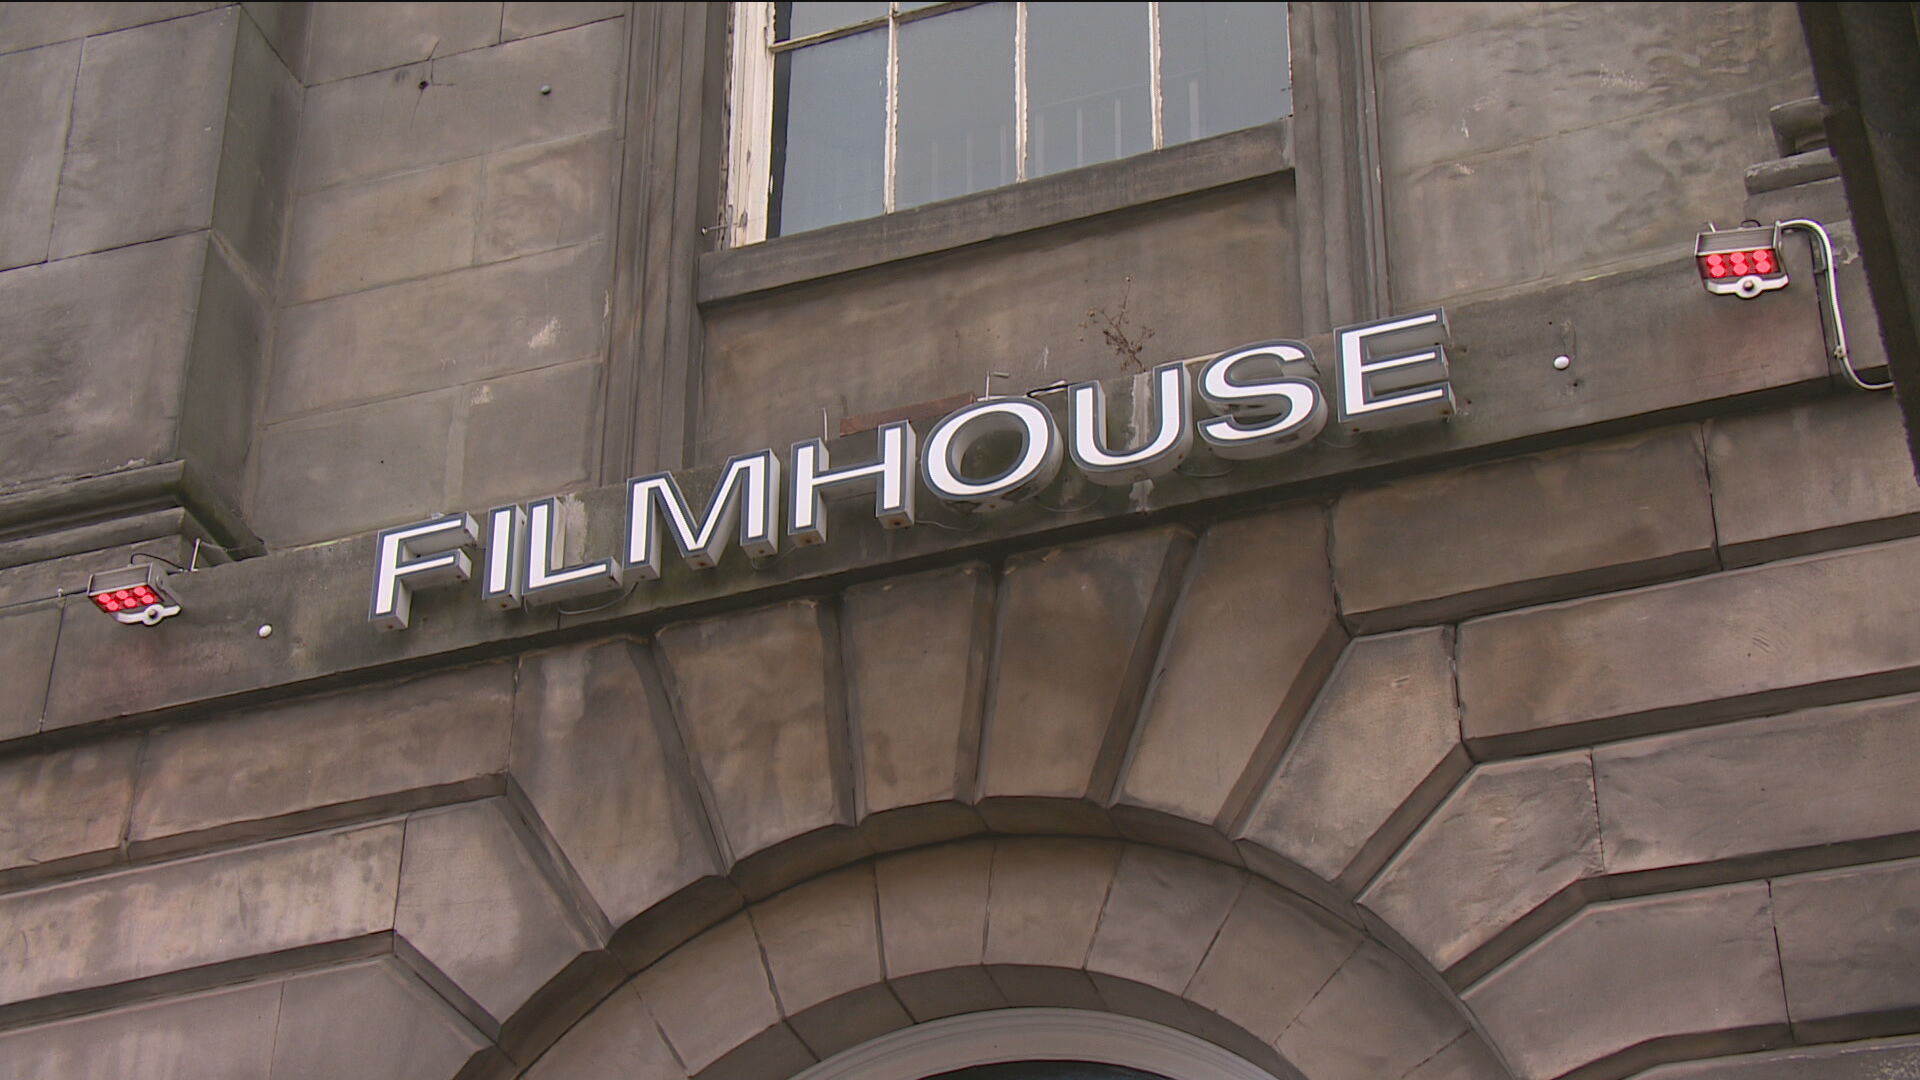 The 1830s cinema has gone up for sale on the open market.